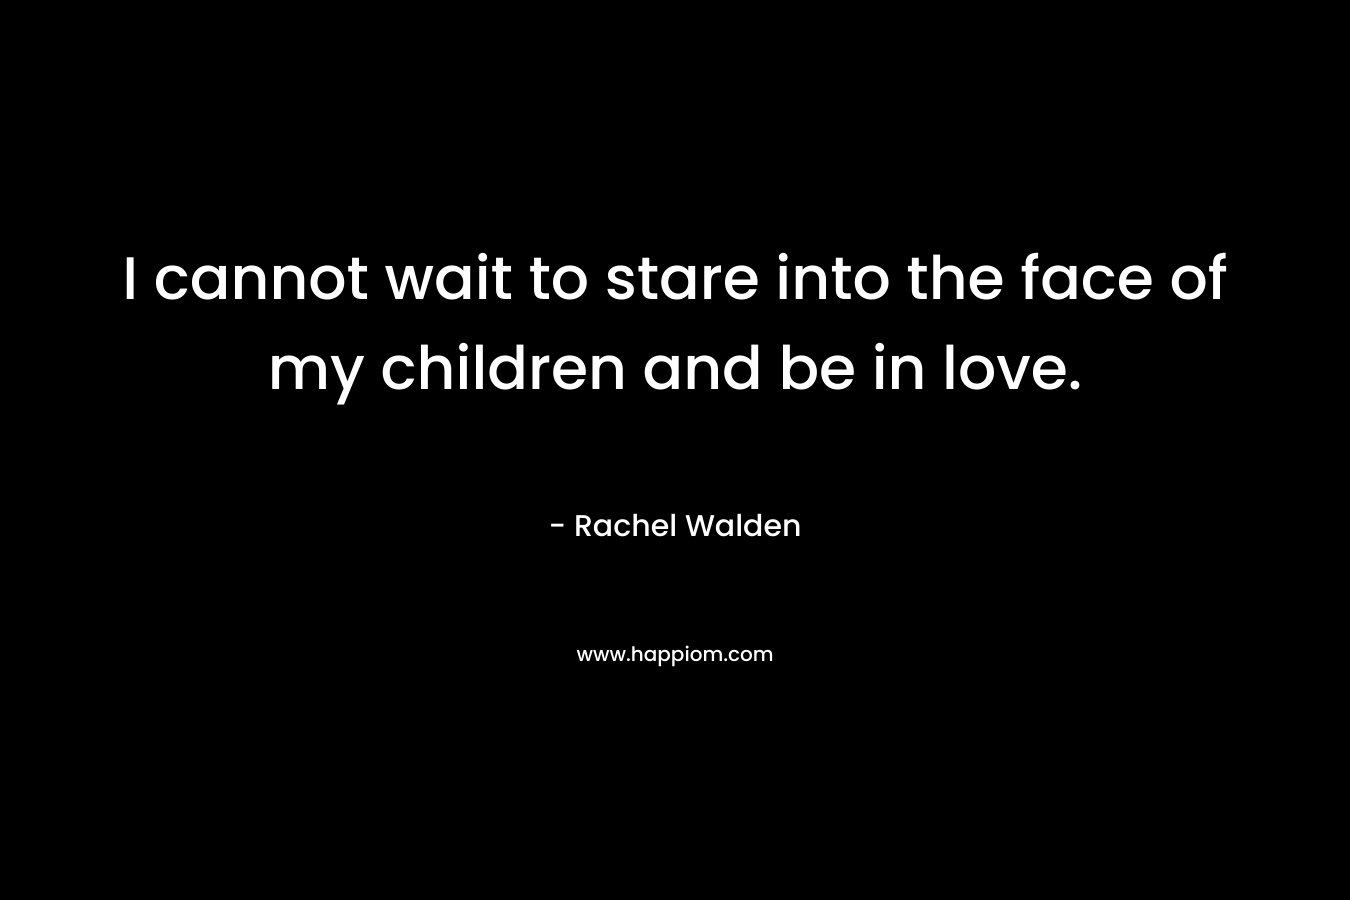 I cannot wait to stare into the face of my children and be in love.